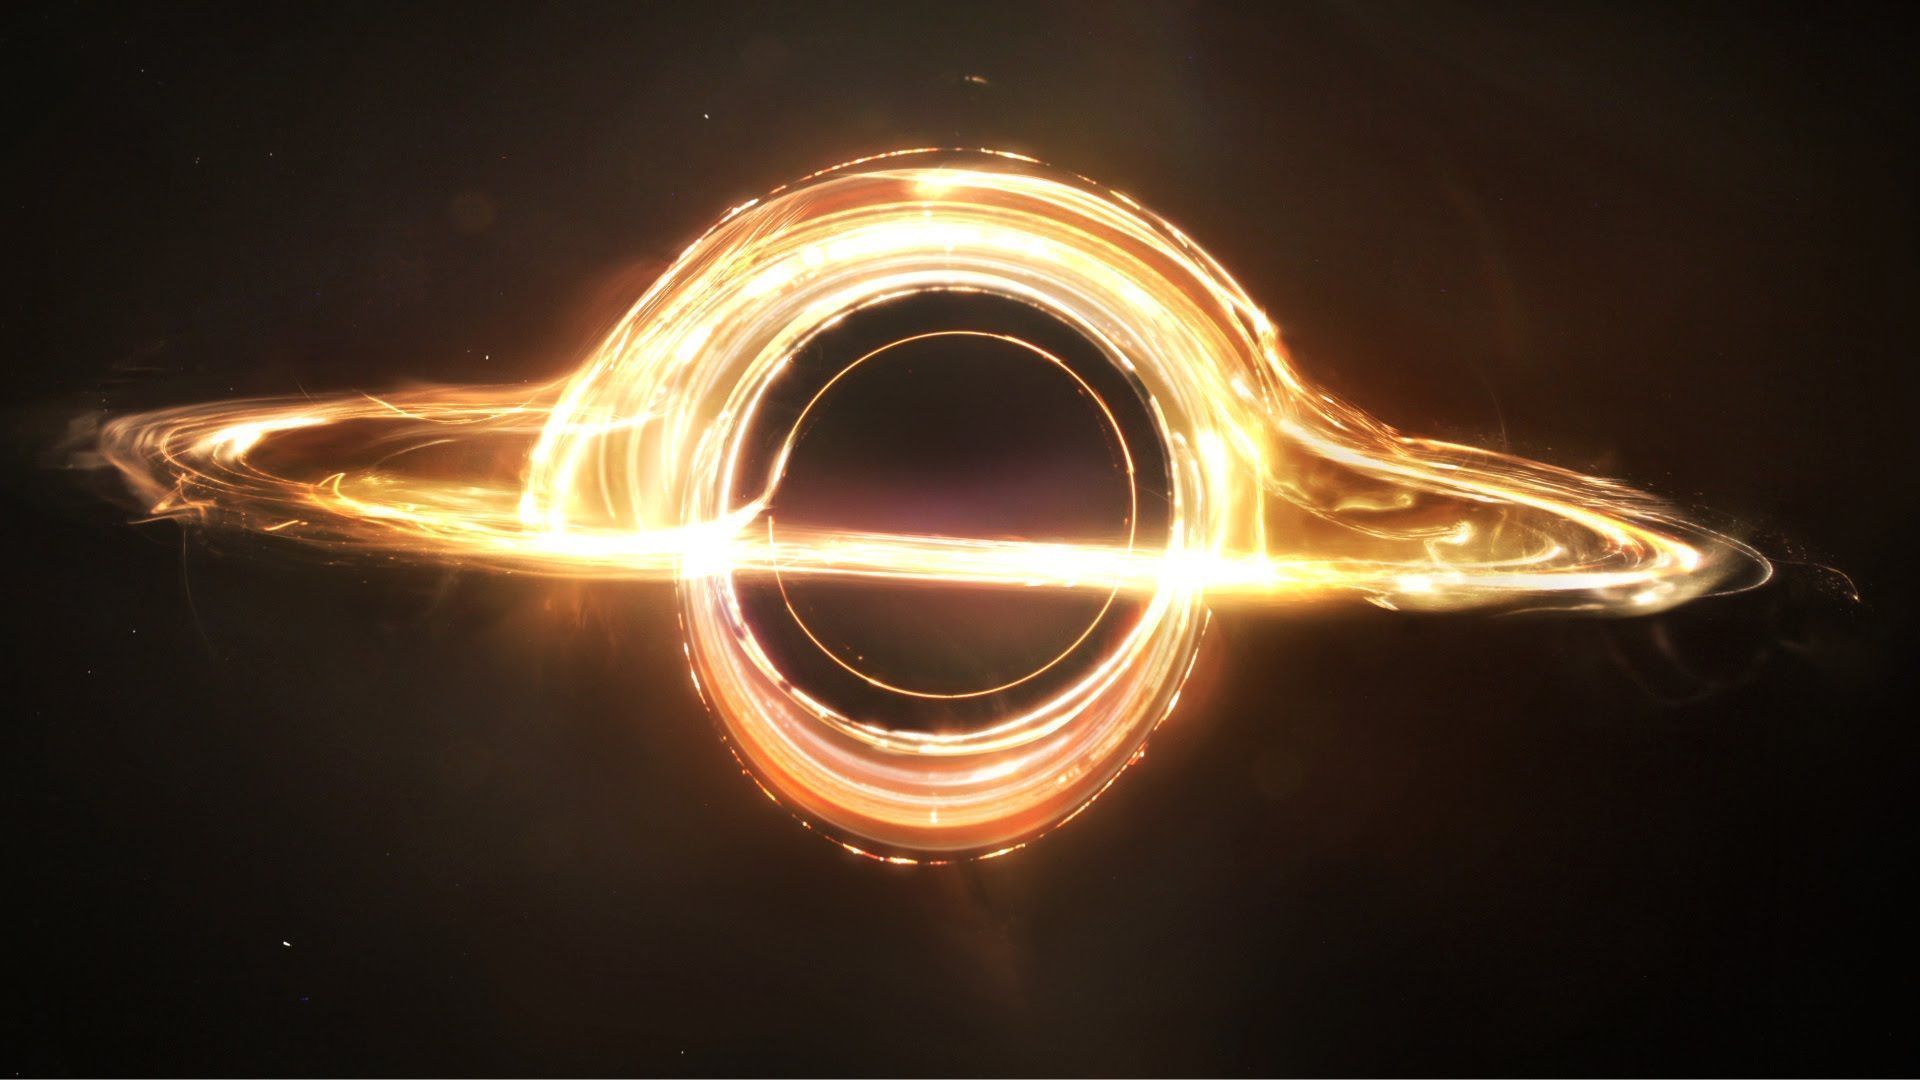 Black Hole the Movie Wallpaper - Pics about space